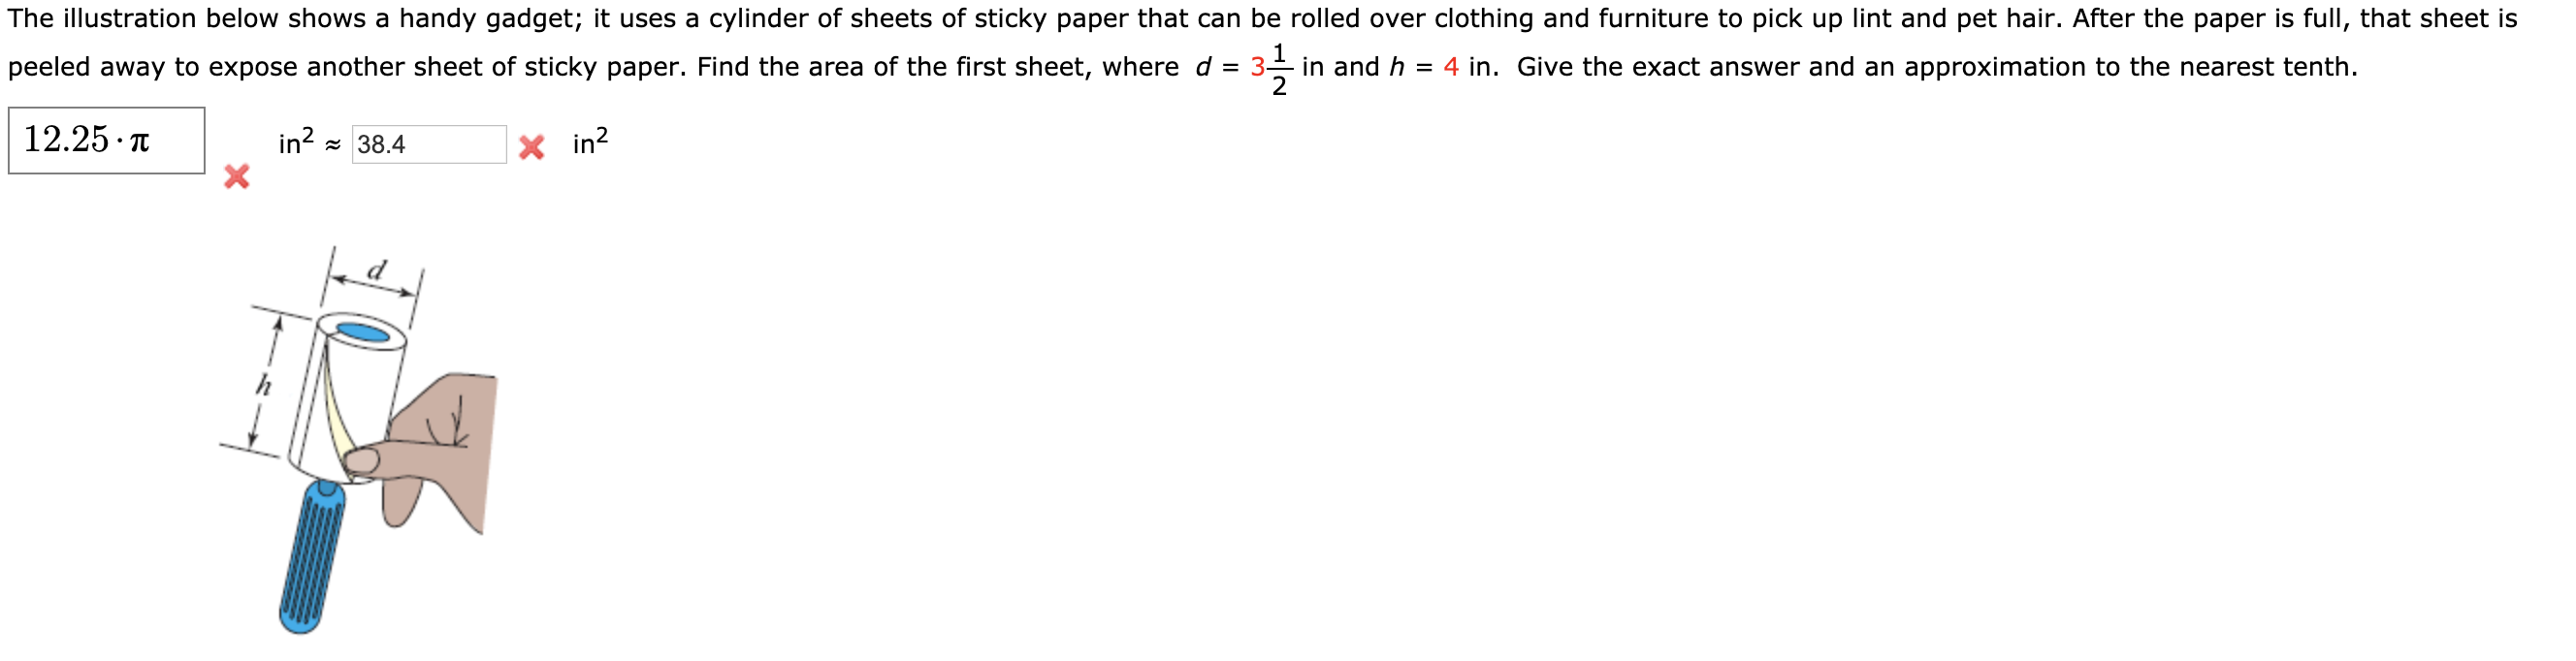 The illustration below shows a handy gadget; it uses a cylinder of sheets of sticky paper that can be rolled over clothing and furniture to pick up lint and pet hair. After the paper is full, that sheet is
peeled away to expose another sheet of sticky paper. Find the area of the first sheet, where d = 3- in and h
= 4 in. Give the exact answer and an approximation to the nearest tenth.
12.25 · T
in? = 38.4
X in?
